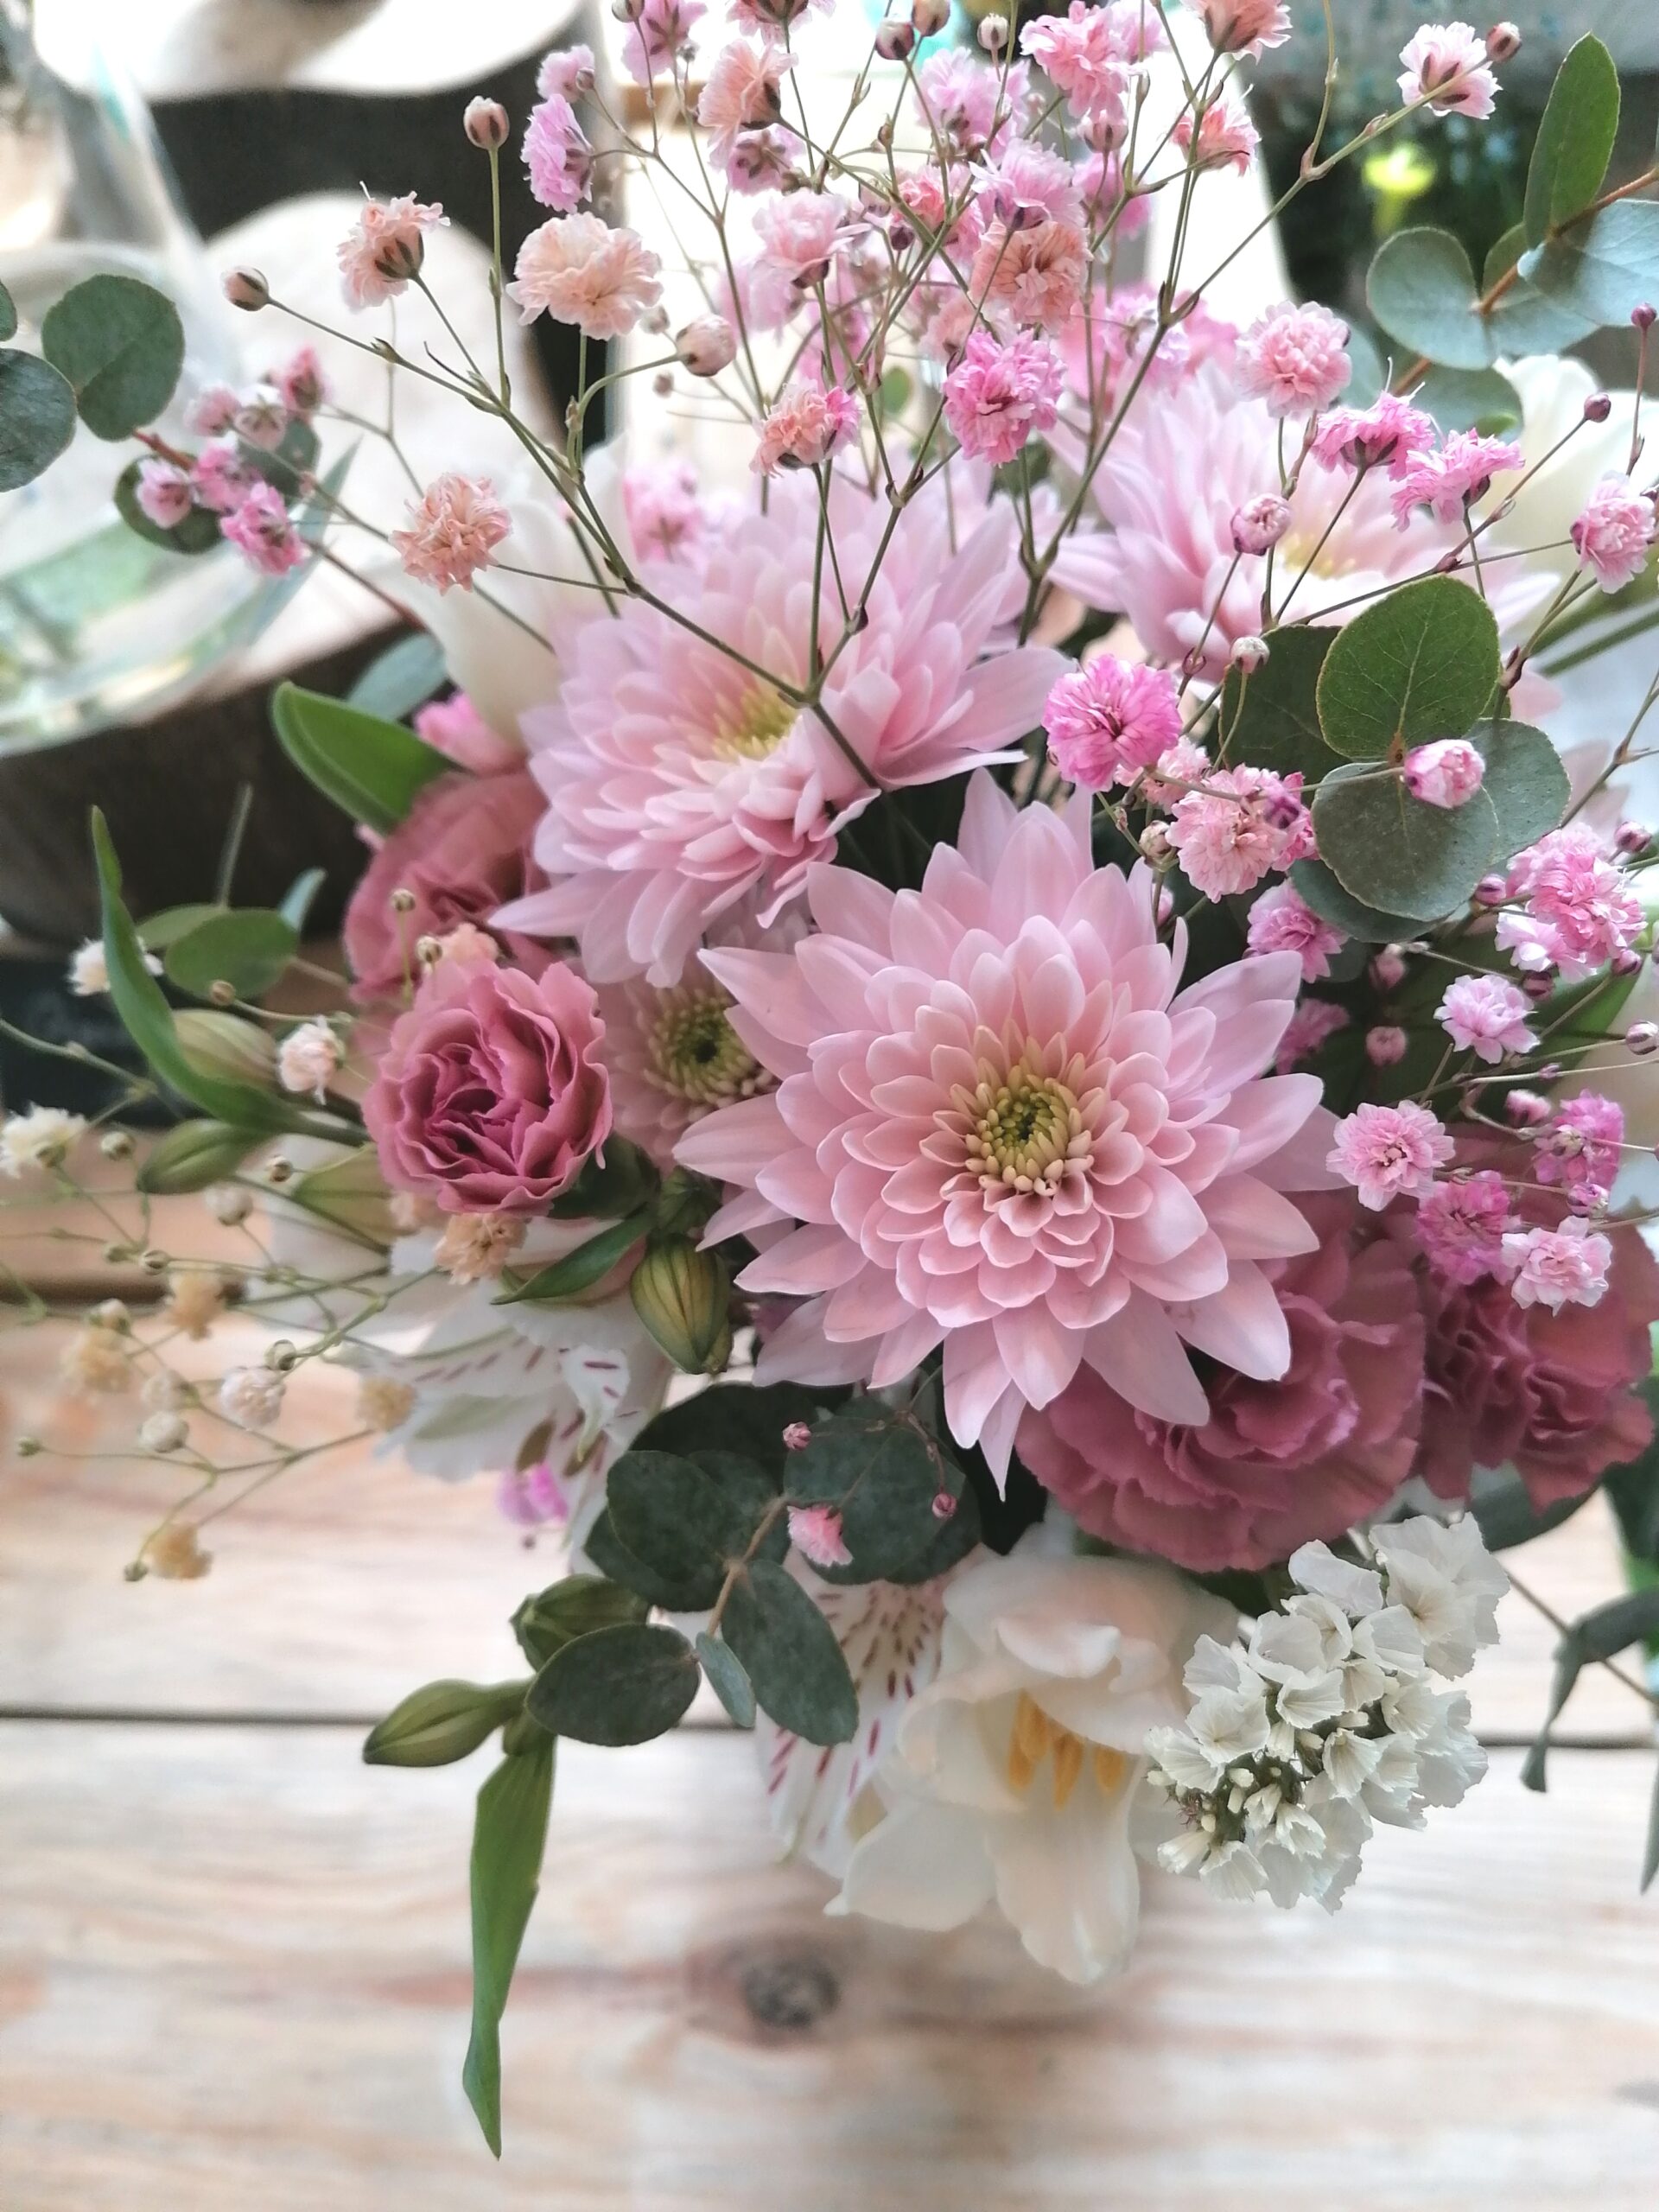 The mini bouquet is a compact little bouquet. Charming thanks to its dome form and pastel pink tones. Filigree additions in the form of gypsophila and white floral ornaments give it a unique charm.